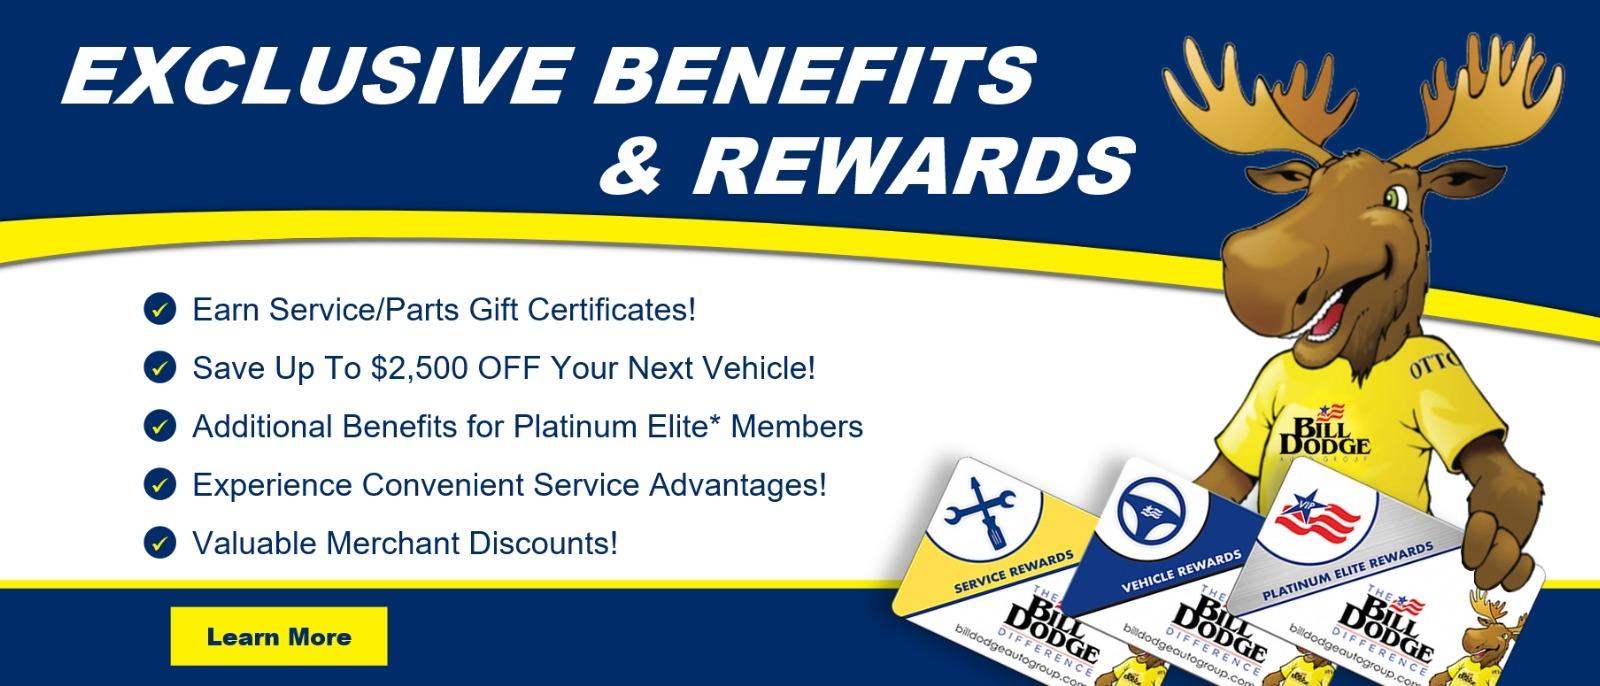 Join the Bill Dodge Auto Rewards Program!  Get exclusive benefits and rewards. Click to Learn More